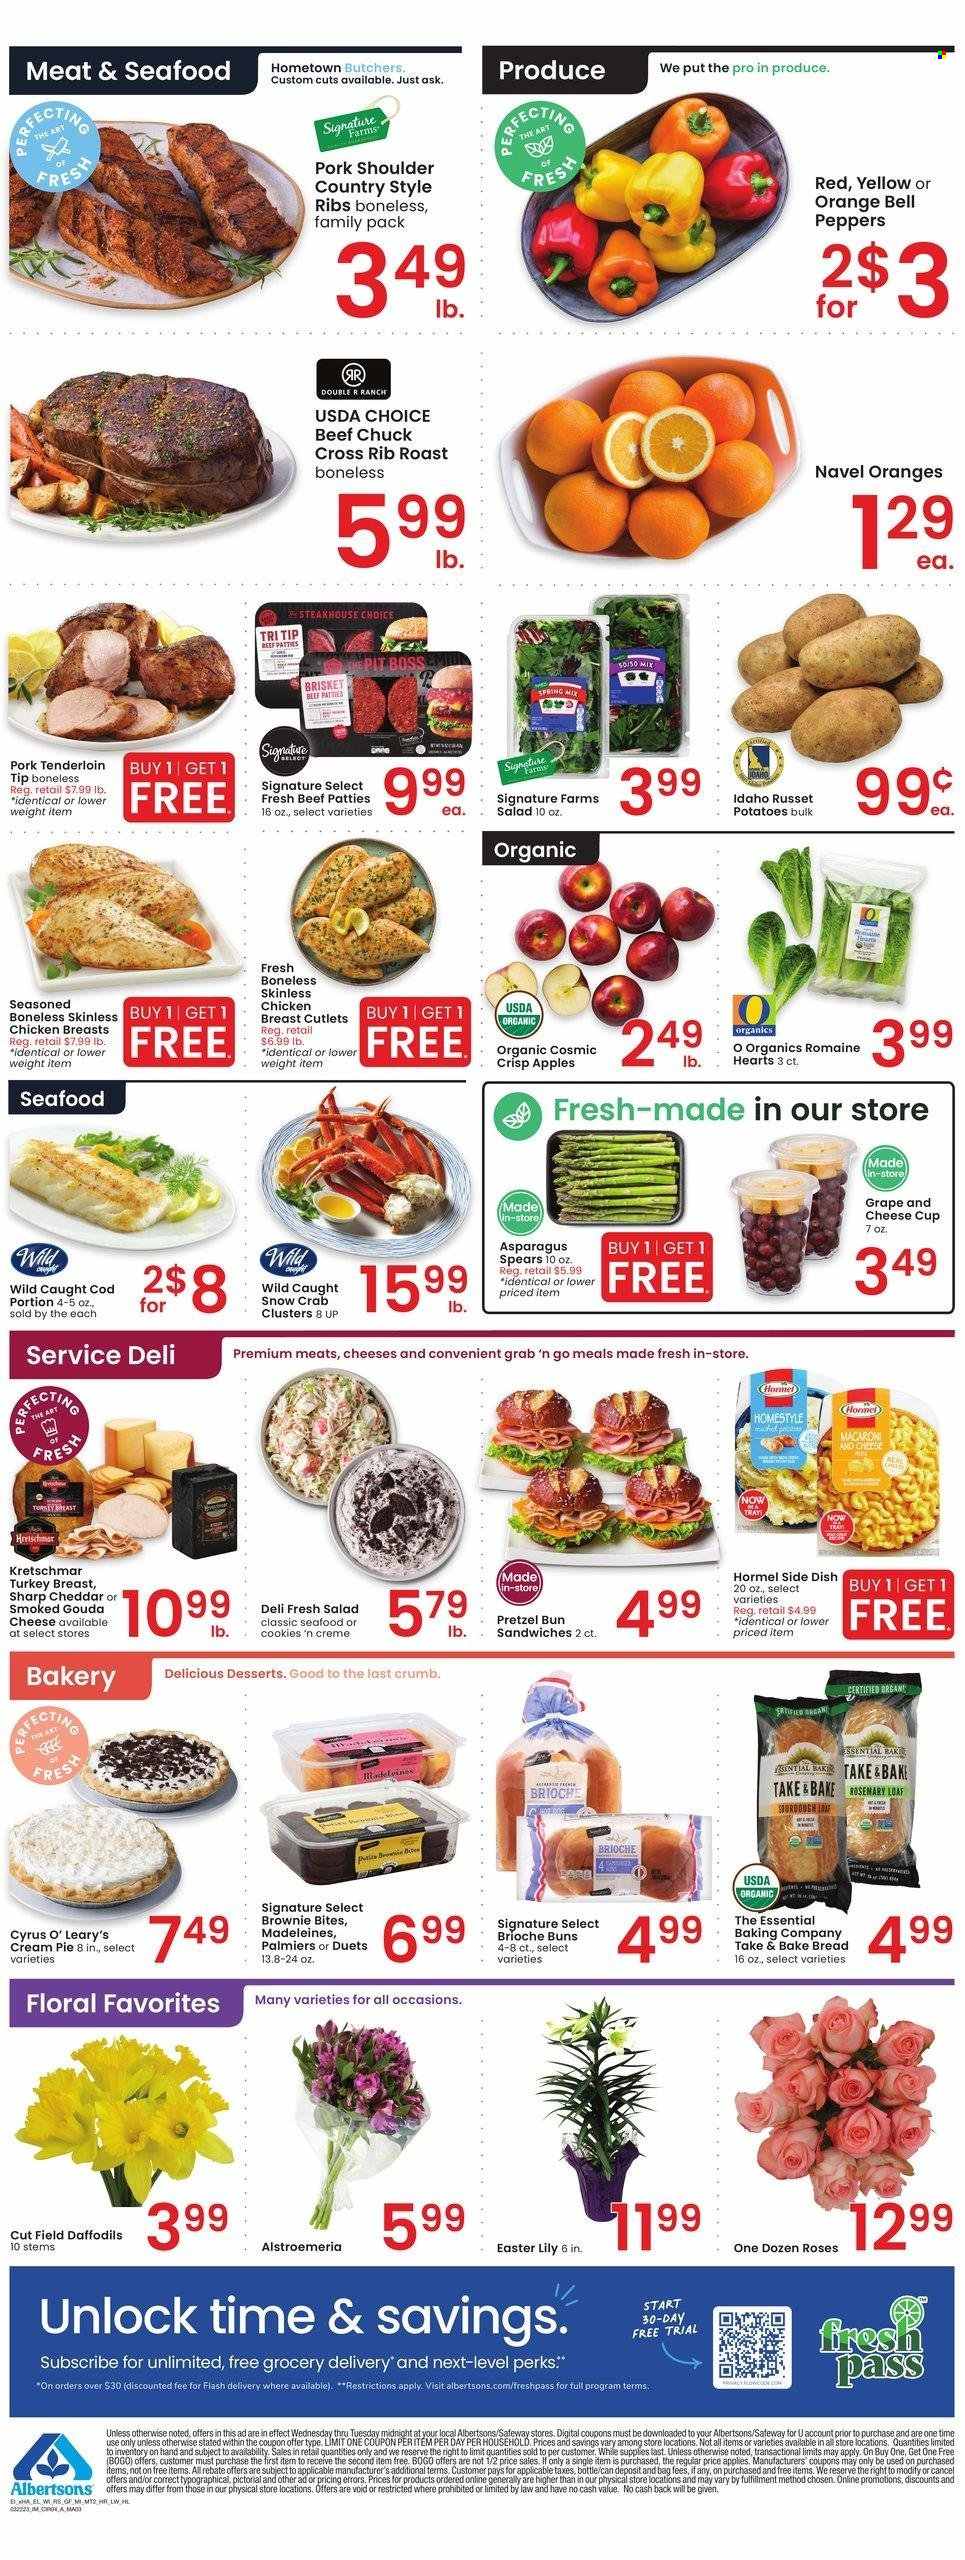 thumbnail - Albertsons Flyer - 03/22/2023 - 03/28/2023 - Sales products - bread, pretzels, pie, buns, brioche, brownies, cream pie, asparagus, bell peppers, russet potatoes, potatoes, peppers, apples, oranges, cod, seafood, crab, macaroni & cheese, sandwich, Hormel, brisket, roast, gouda, cheddar, cheese cup, cookies, chicken breasts, chicken, ribs, pork meat, pork ribs, pork shoulder, pork tenderloin, country style ribs, cup, rose, daffodil, Alstroemeria, lily, navel oranges. Page 4.